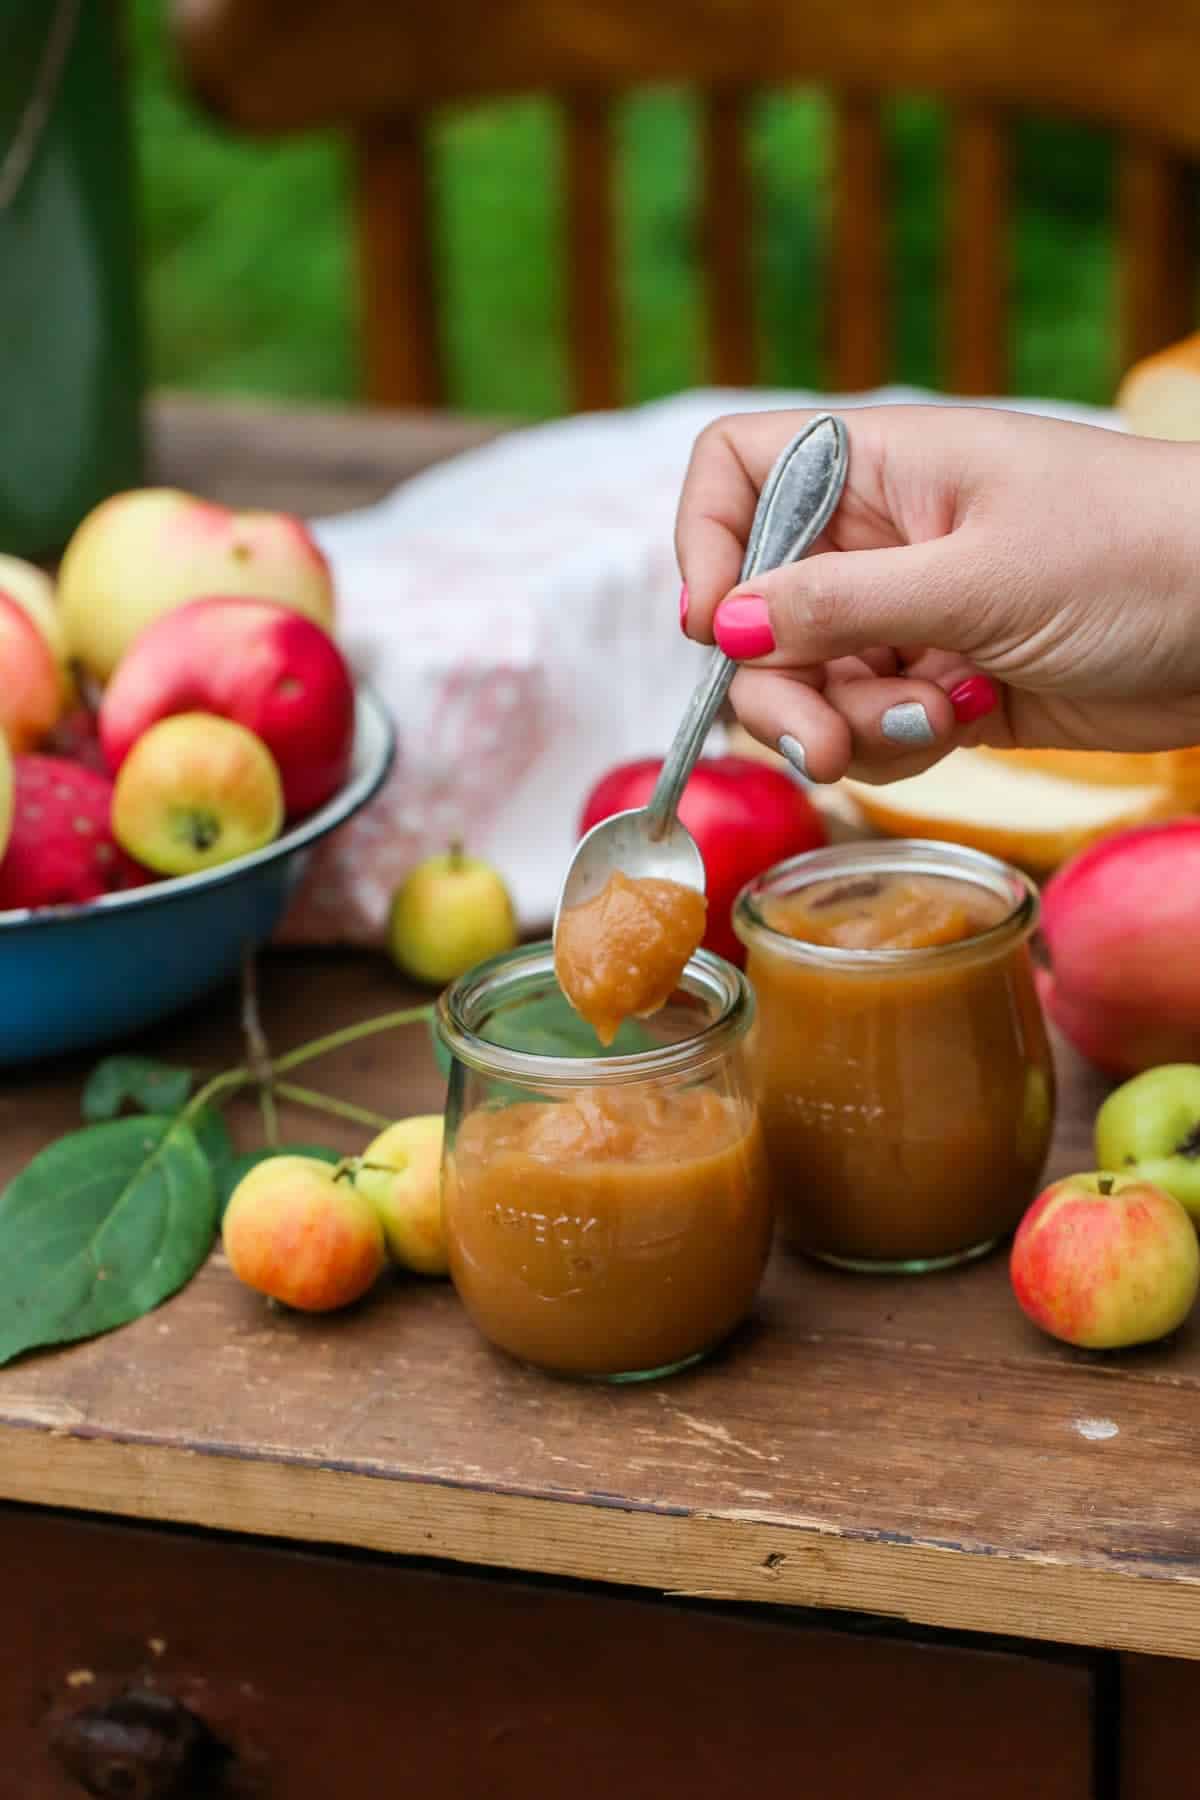 A couple small Weck jars with apple butter, and a small spoon with a hand. 